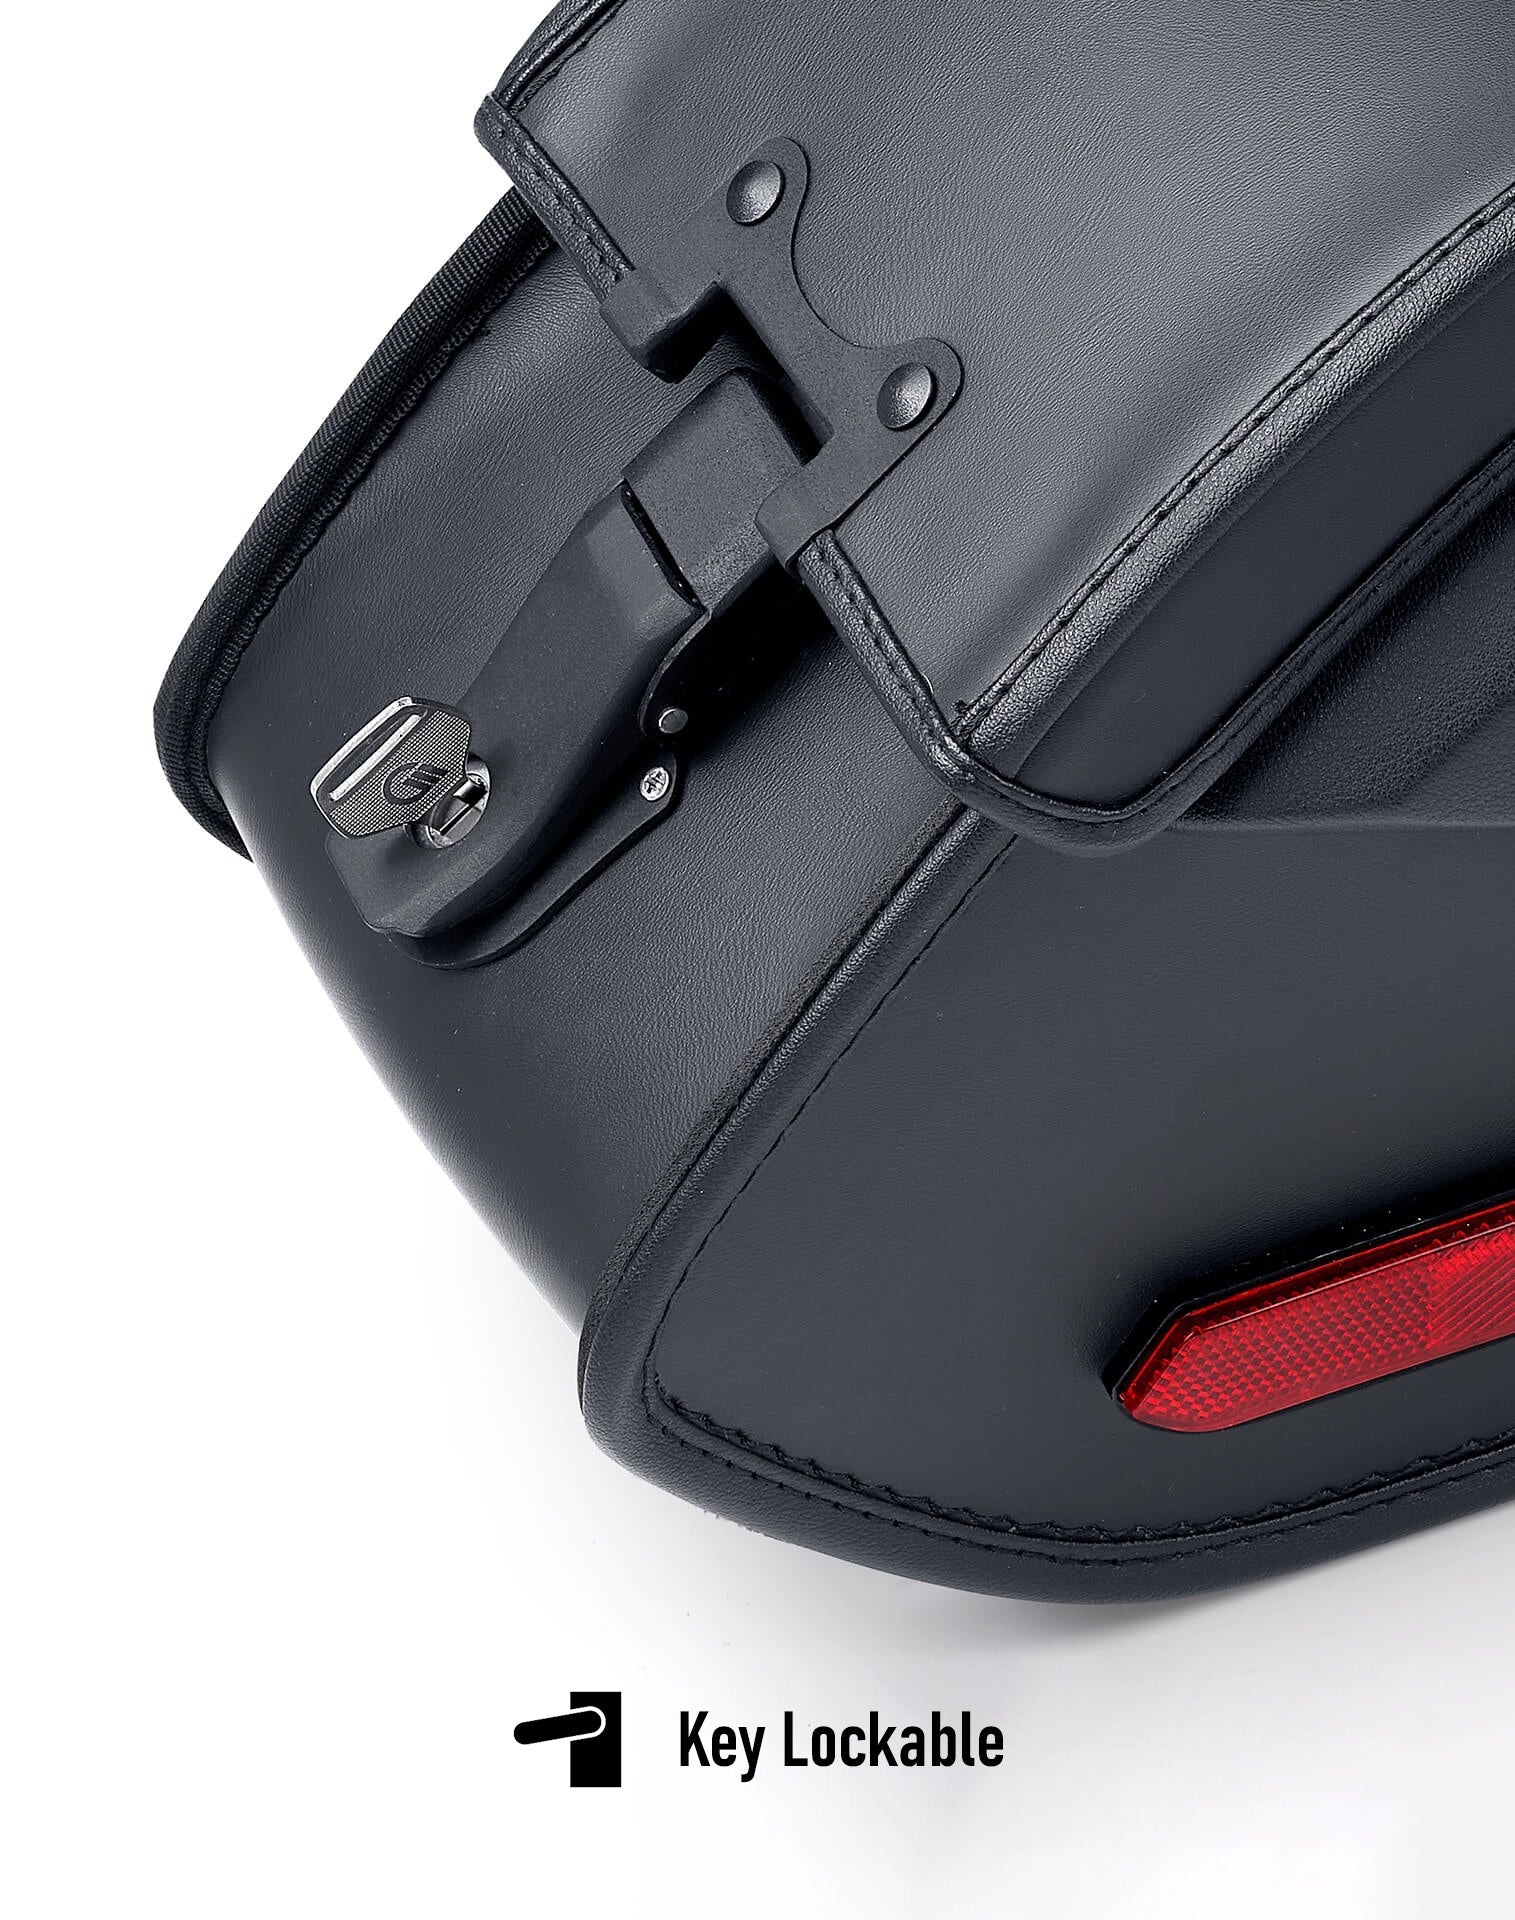 Viking Aviator Large Triumph Rocket Iii Touring Leather Motorcycle Saddlebags are Durable